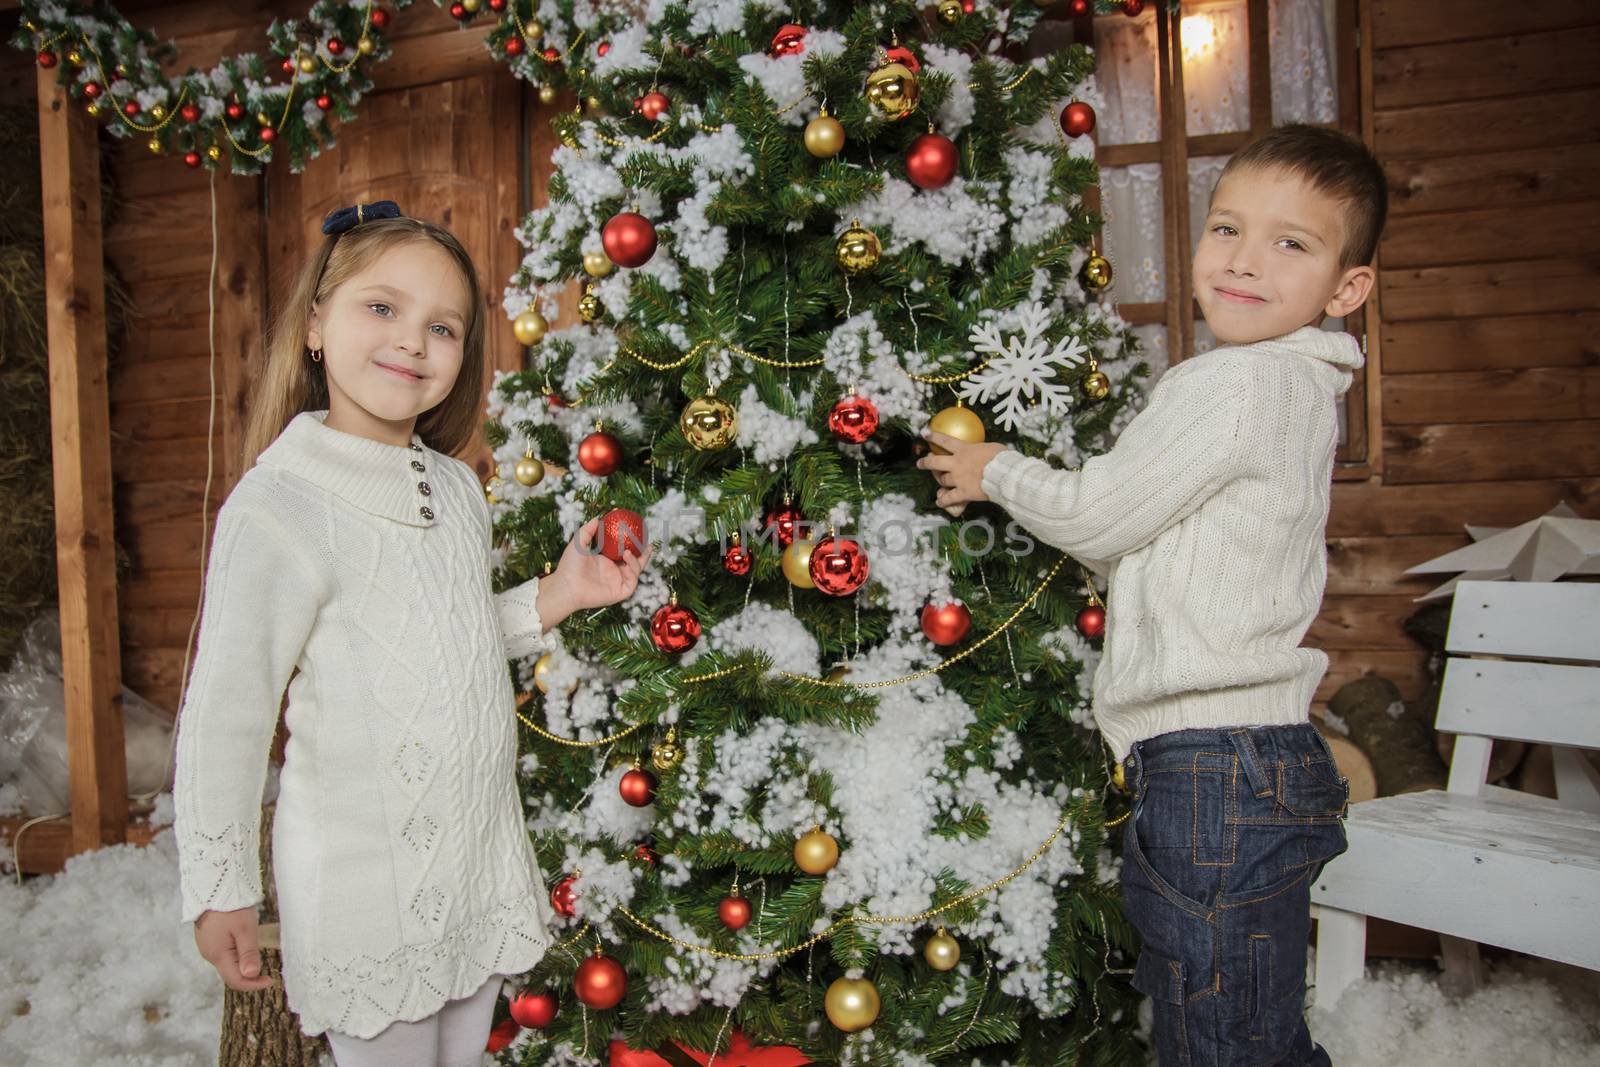 Sister and brother decorating Christmas tree in studio